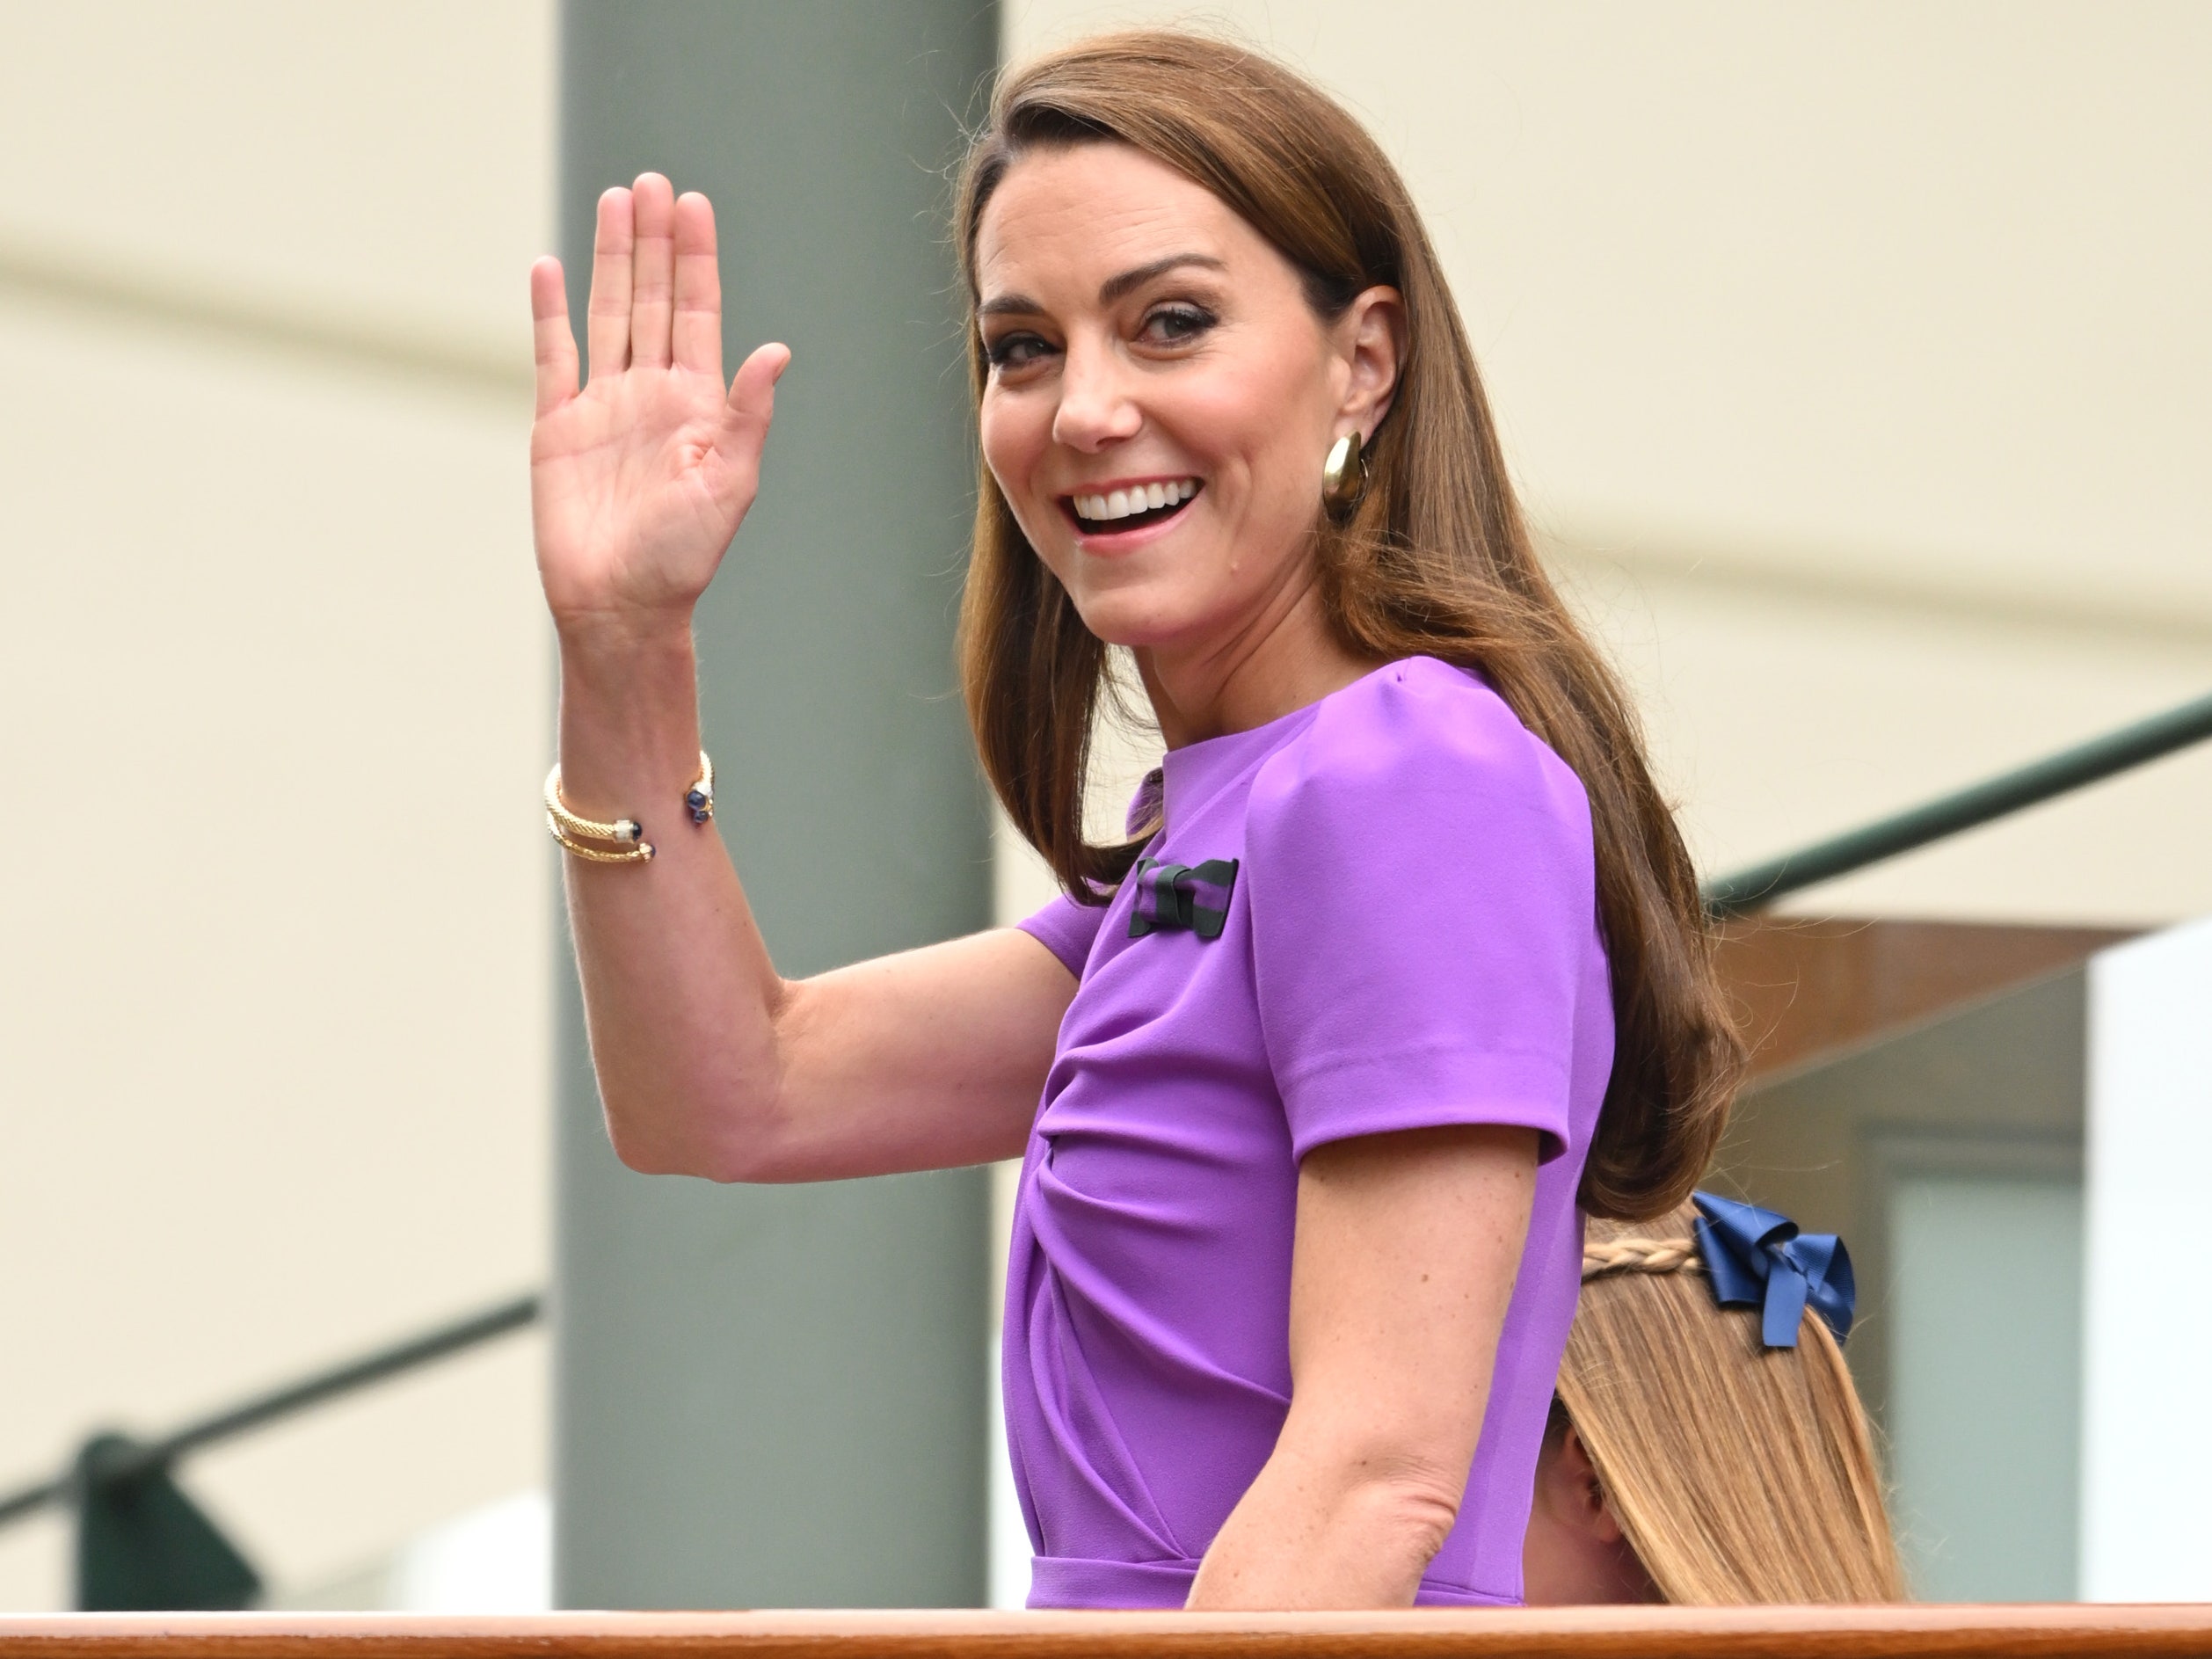 The Princess of Wales Returns to Wimbledon in Royal Purple, With Princess Charlotte in Tow